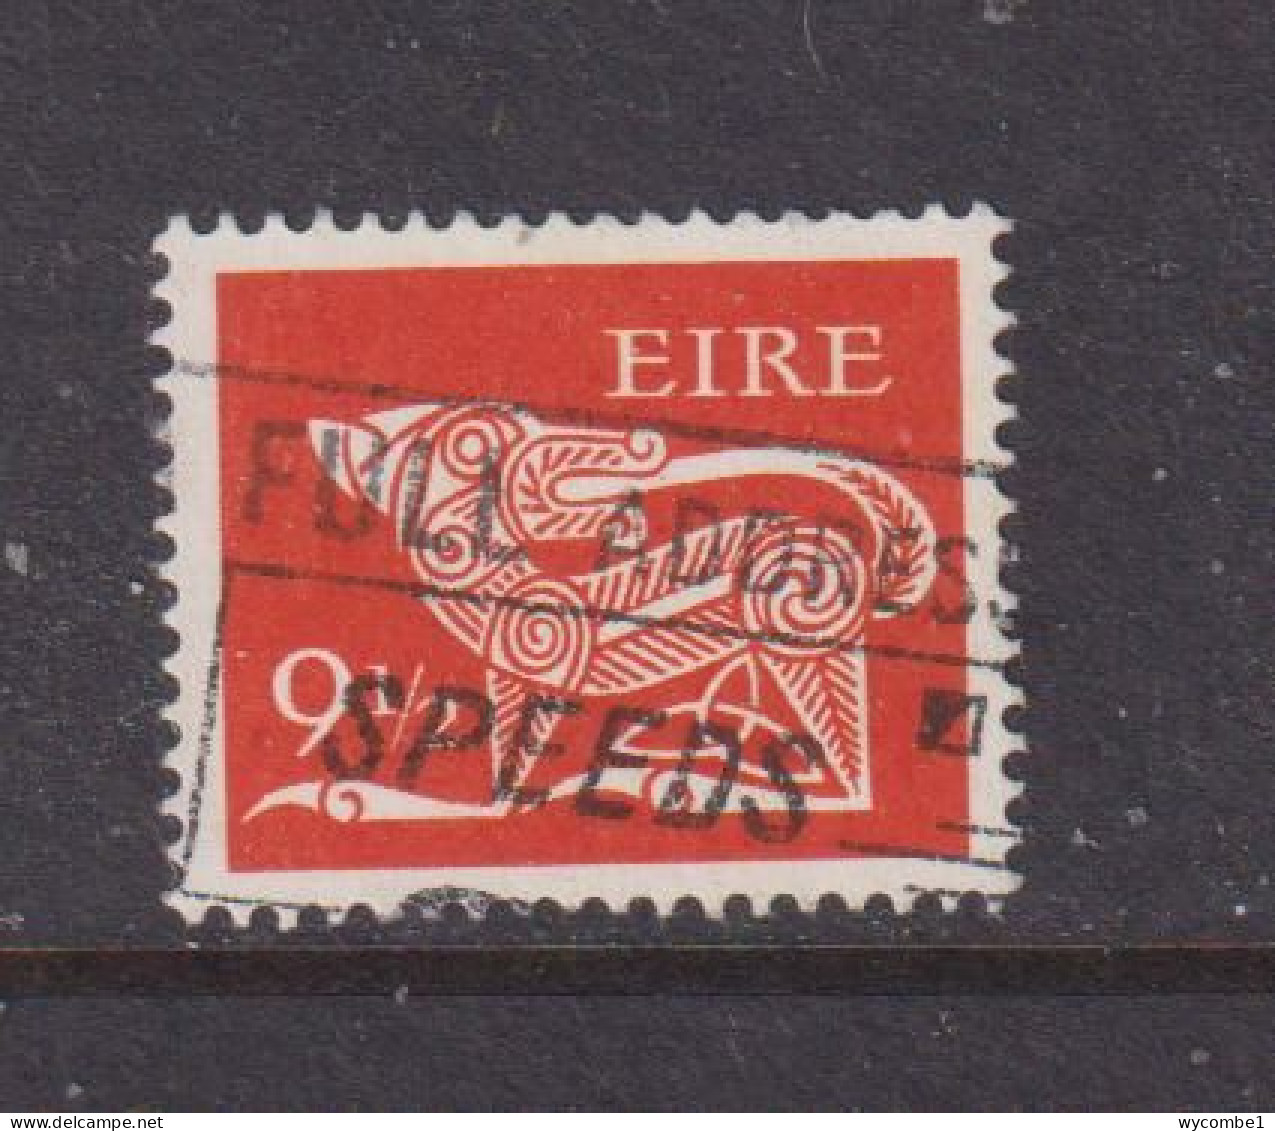 IRELAND - 1971  Decimal Currency Definitives  91/2p  Used As Scan - Oblitérés